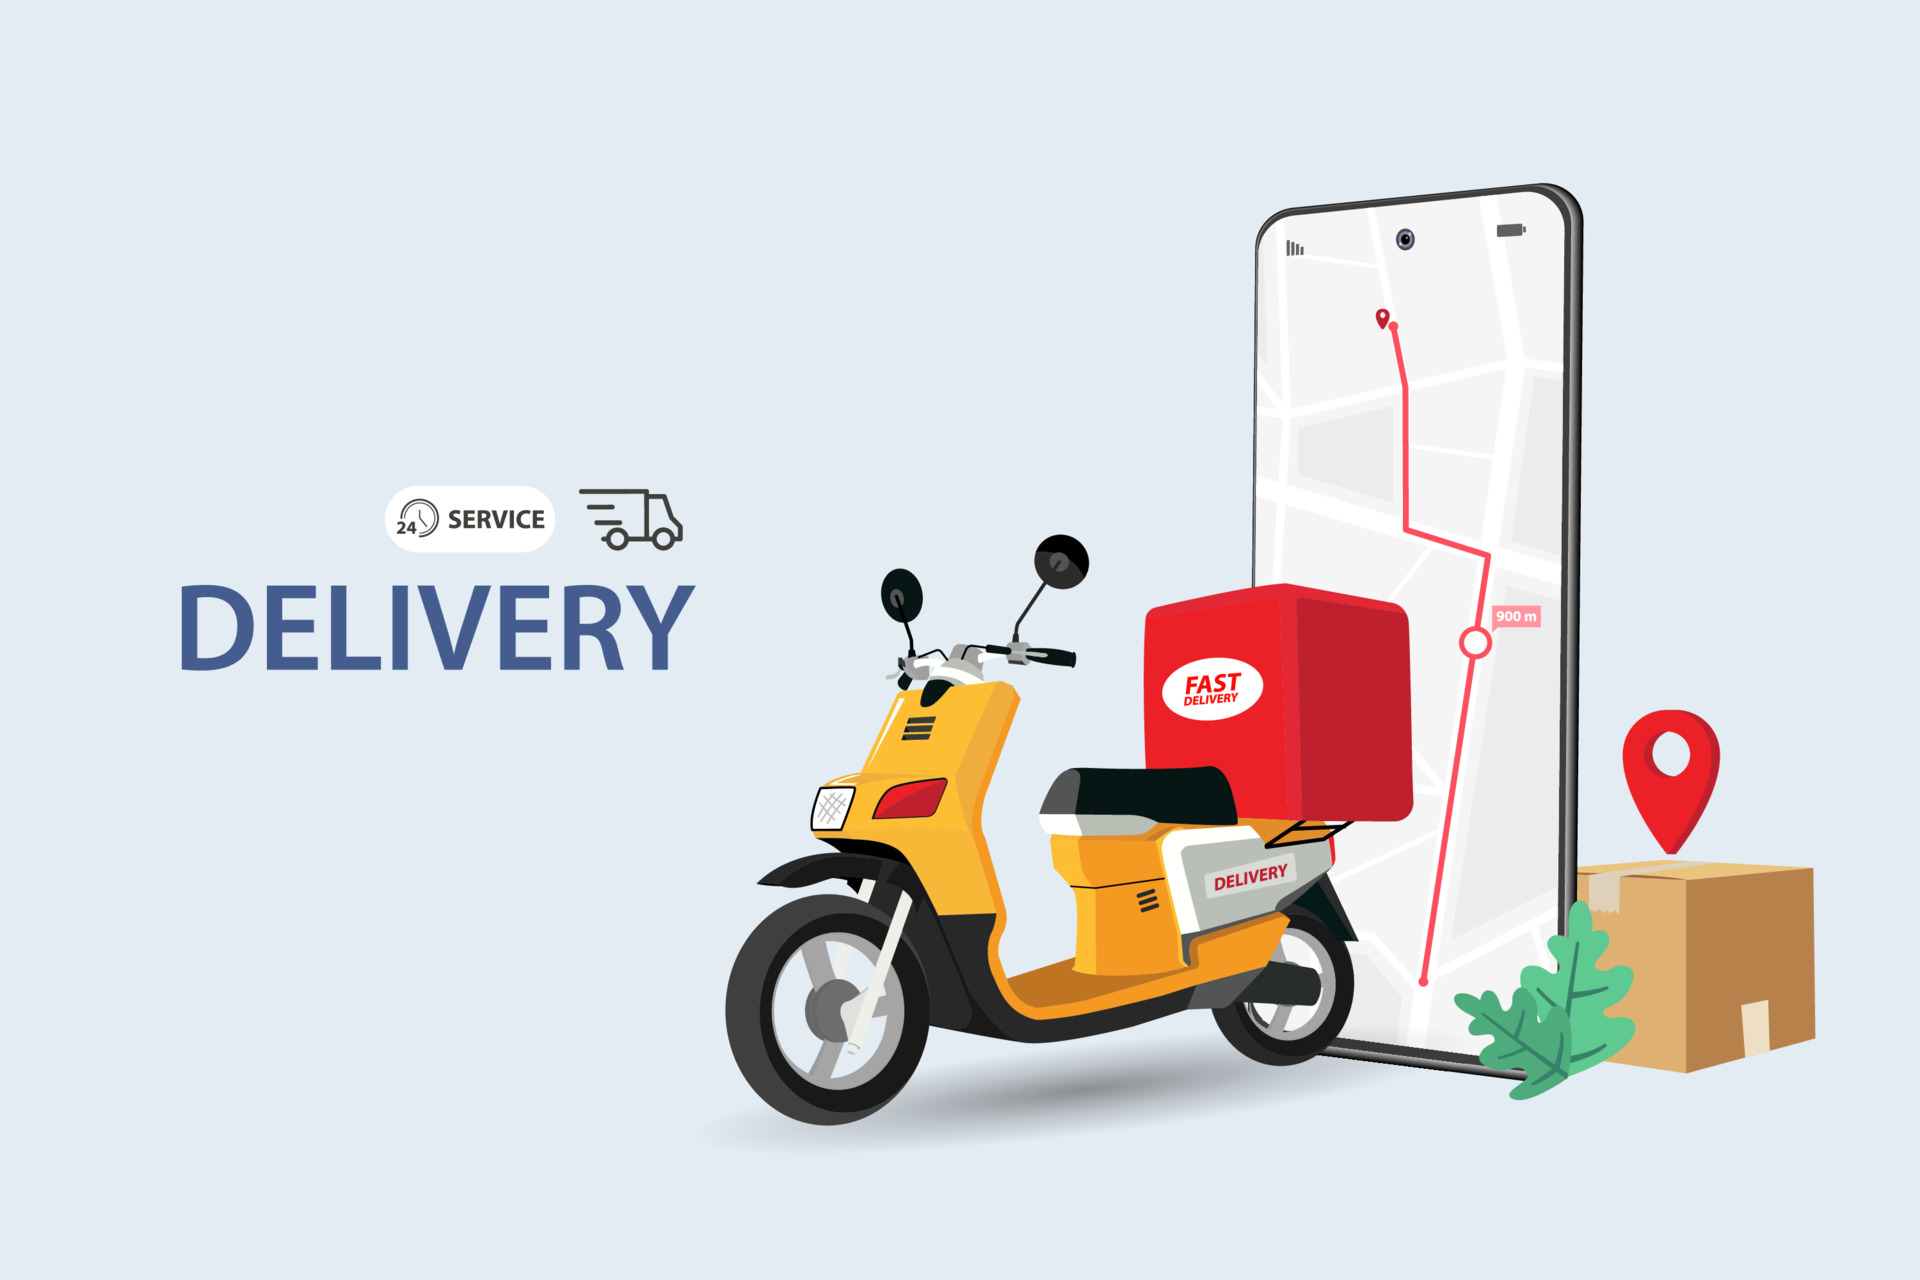 Fast delivery by scooter on mobile. E-commerce concept